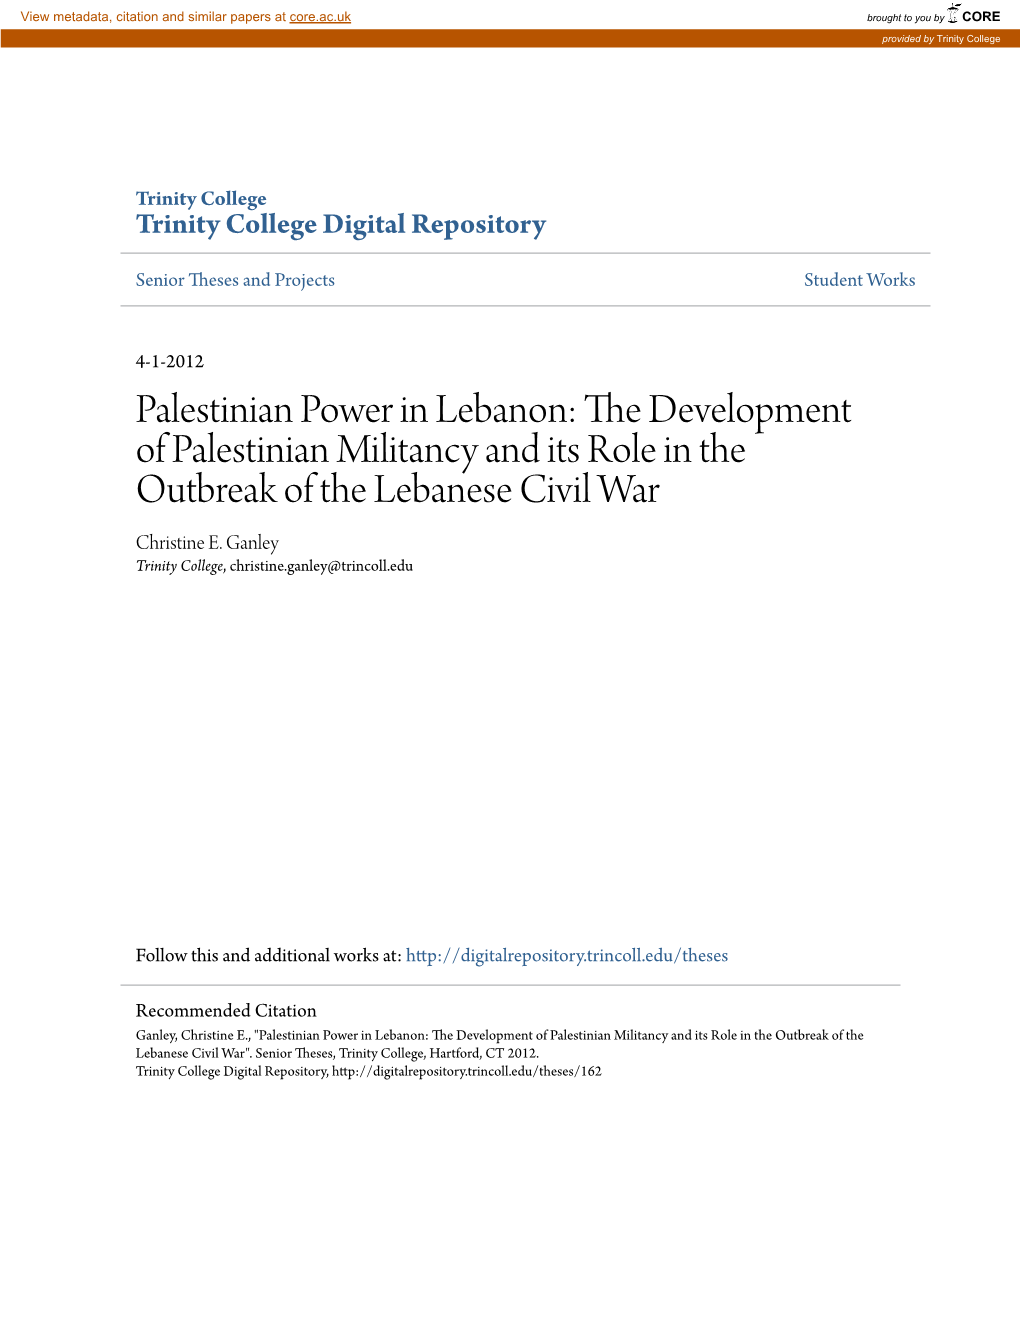 The Development of Palestinian Militancy and Its Role in the Outbreak of the Lebanese Civil War